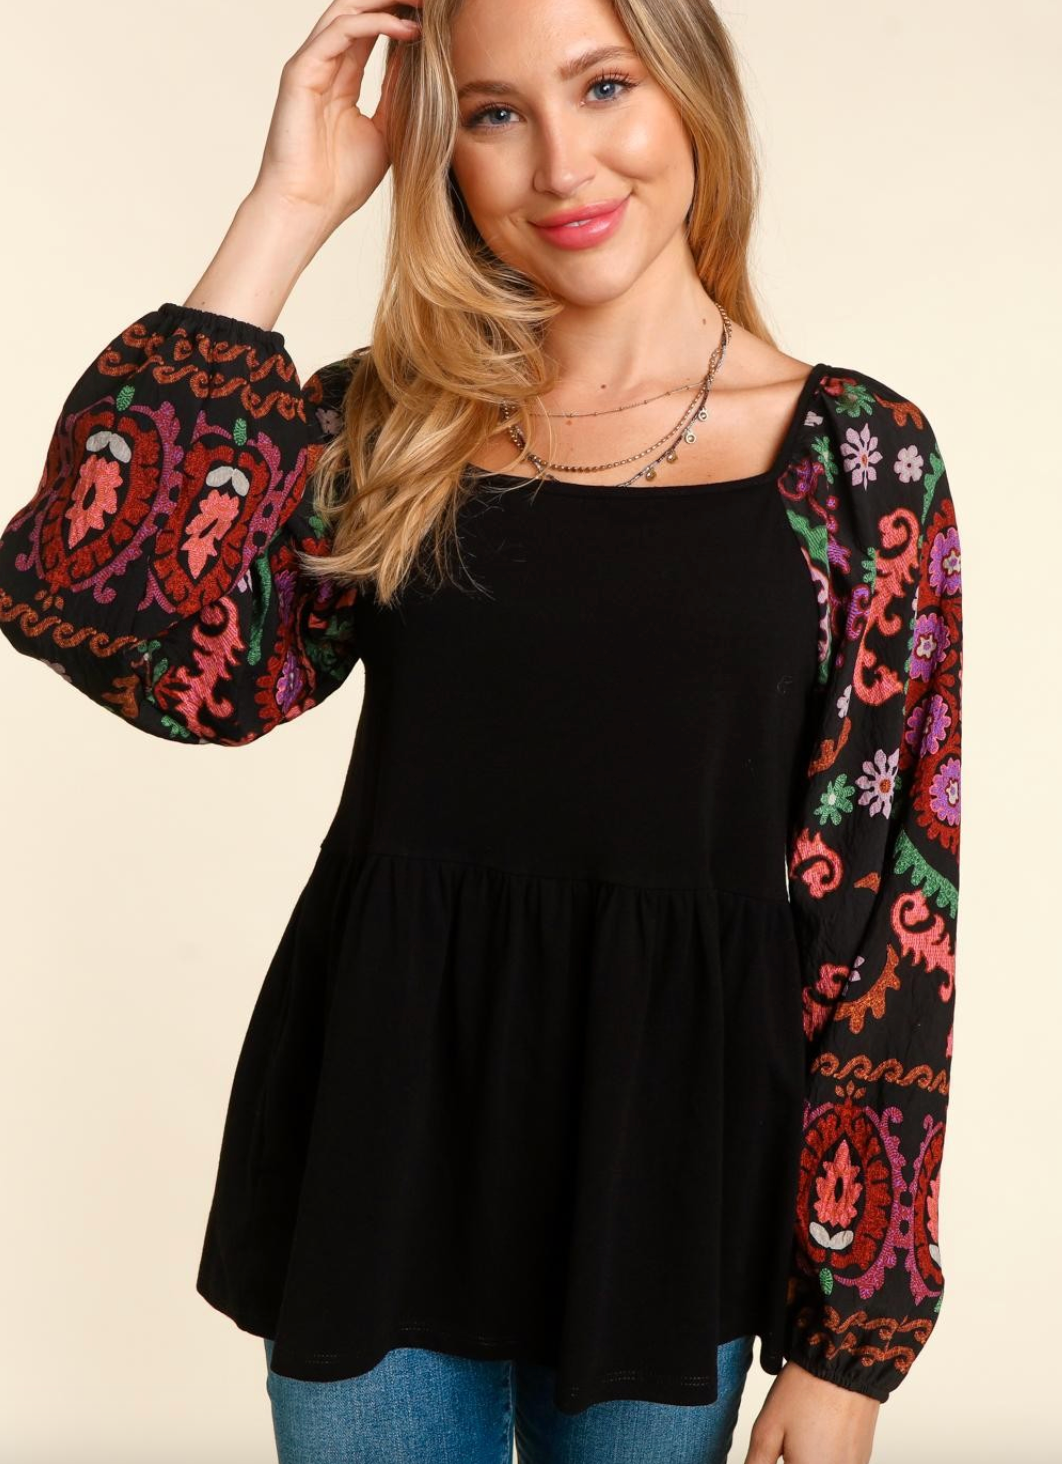 Square Neck Black Peplum Top with Patterned Sleeves